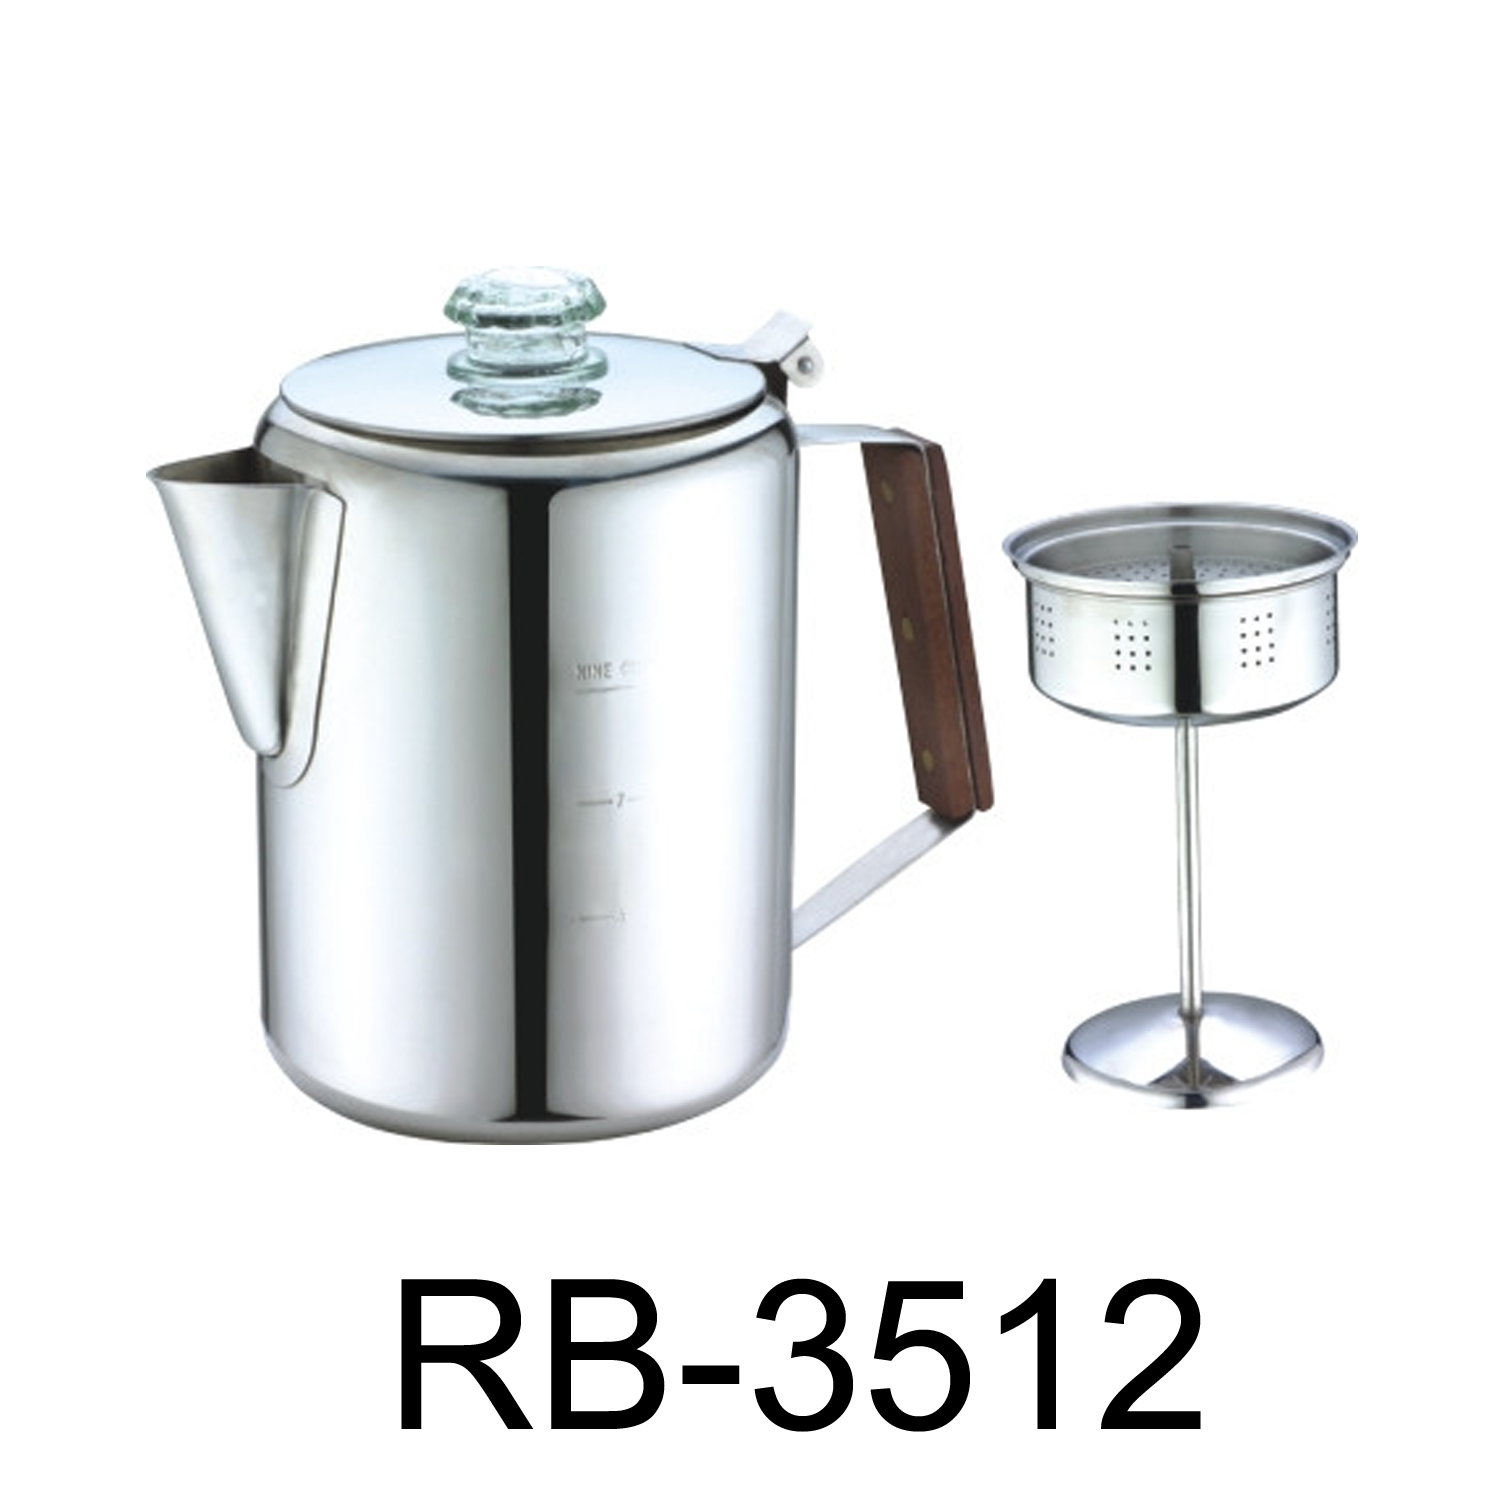 12-Cup Stainless Steel Coffee Maker